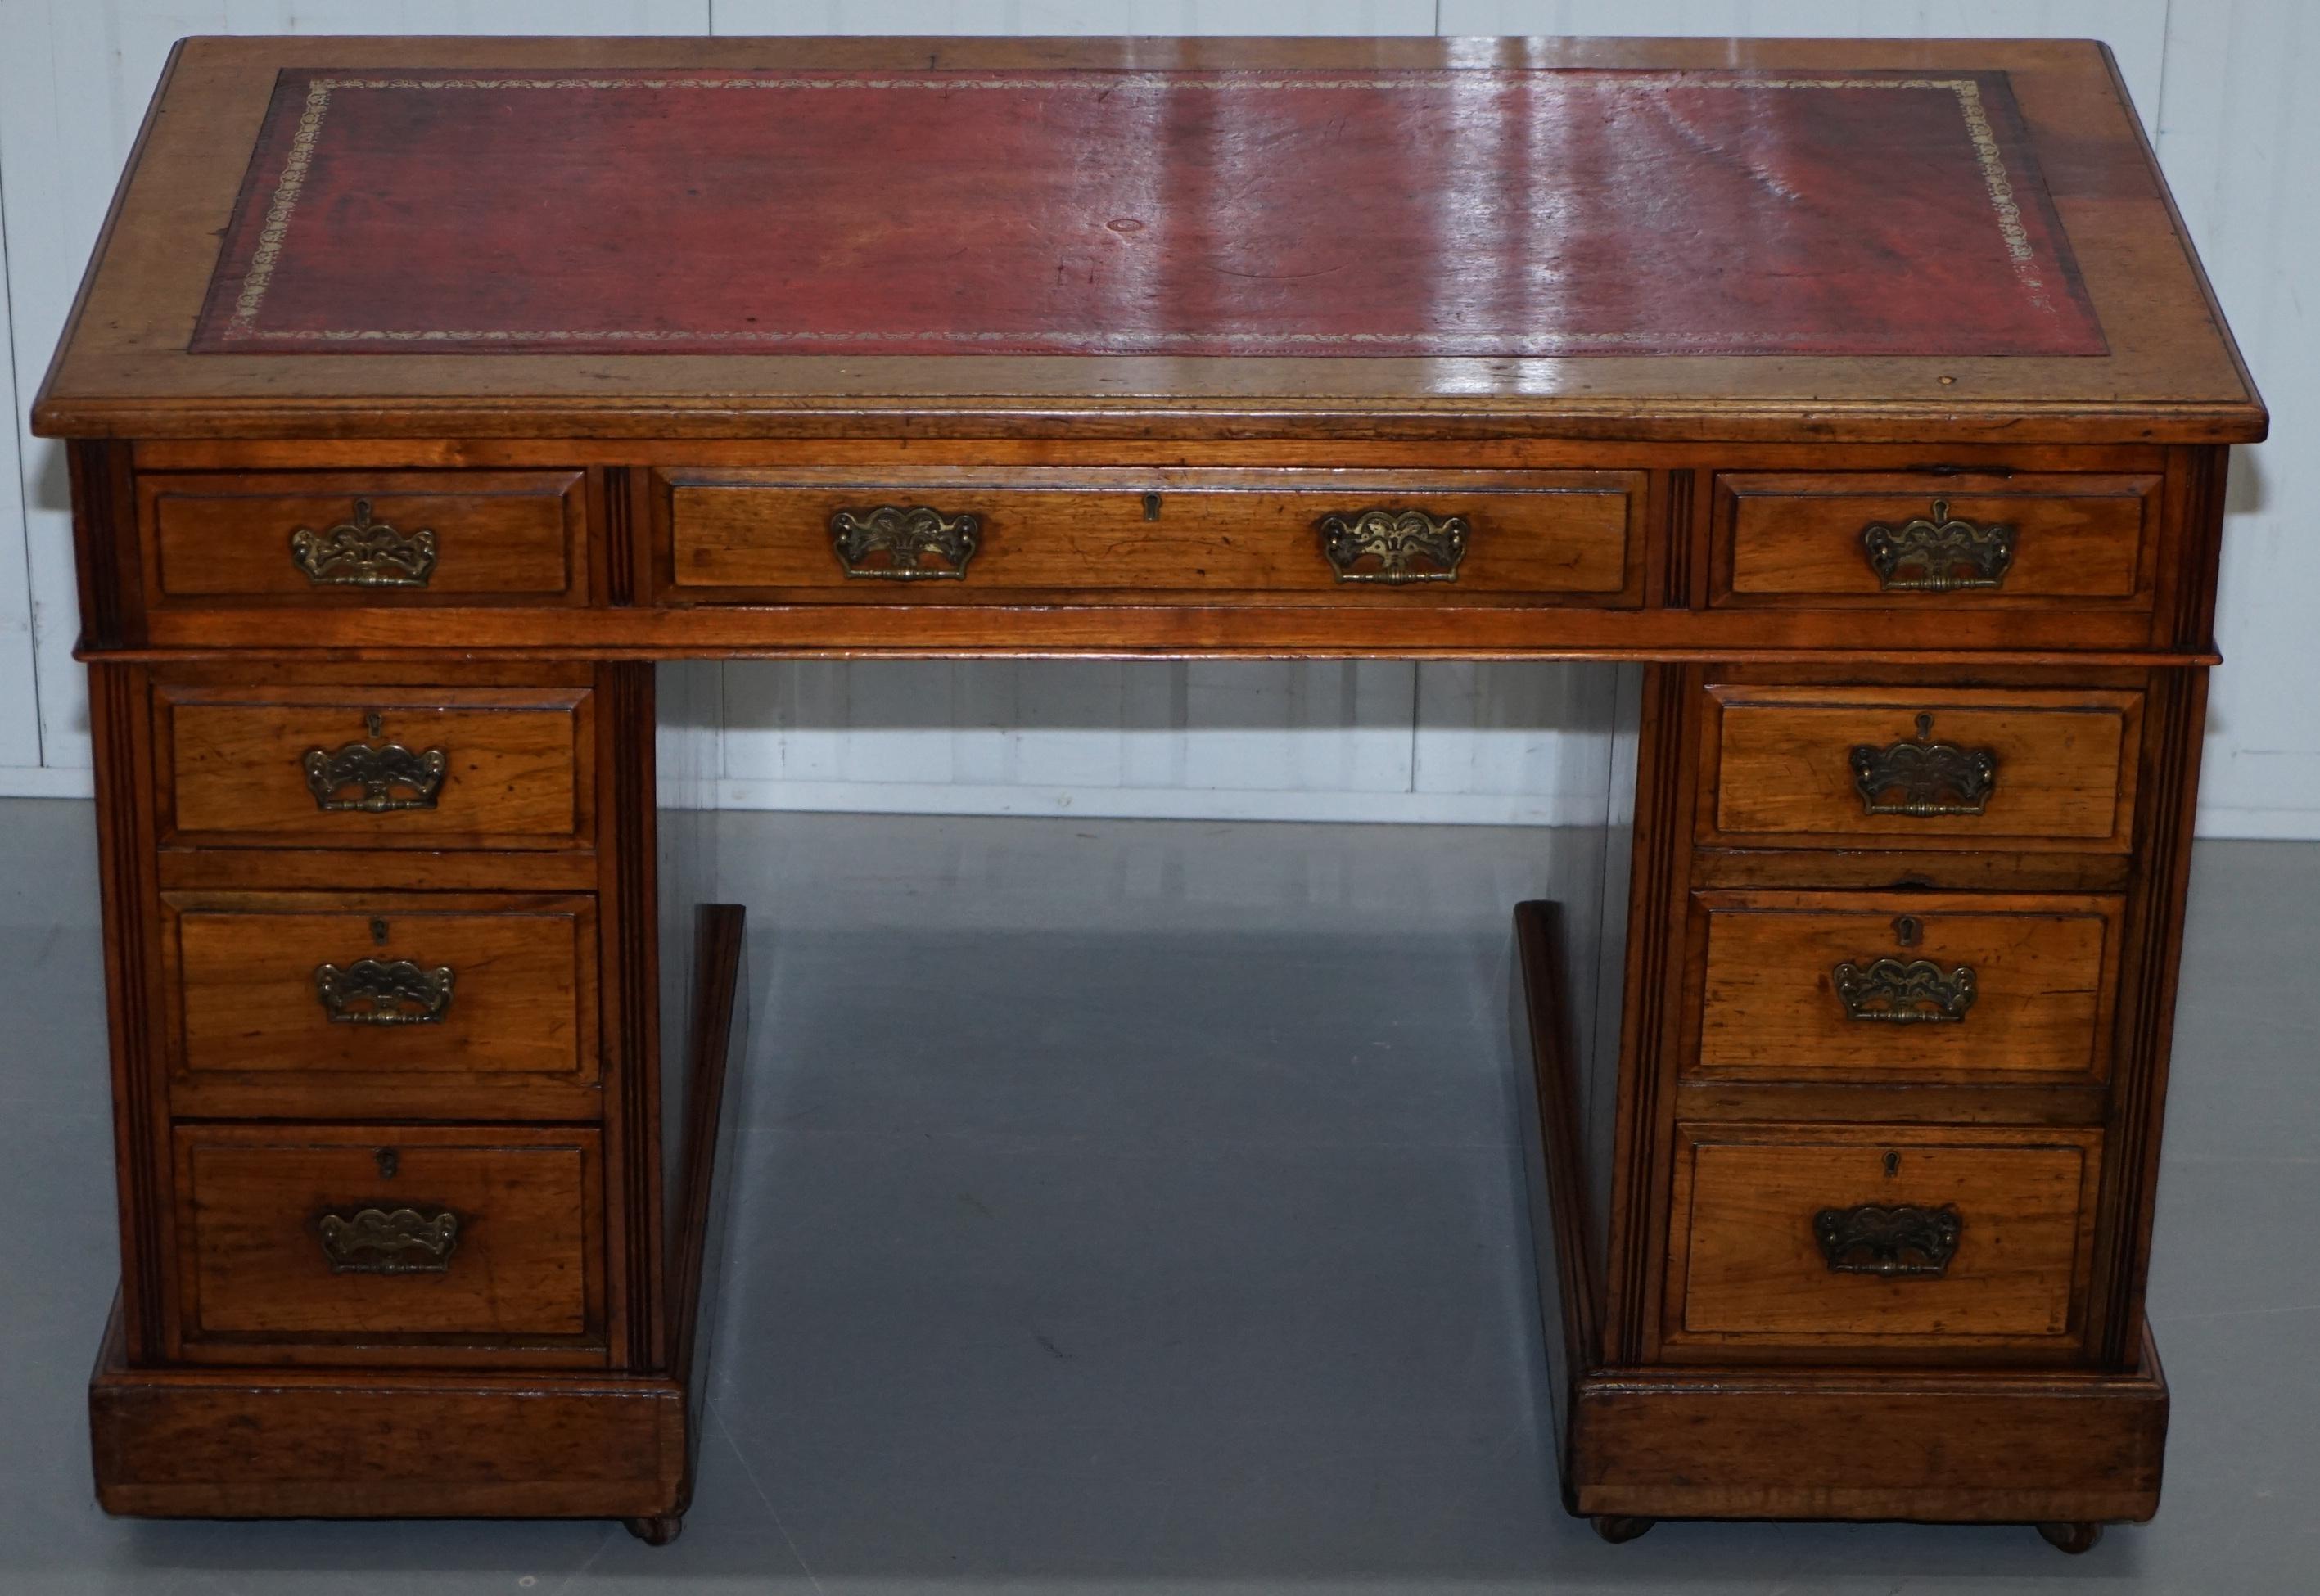 We are delighted to offer for sale this lovely original solid Walnut Victorian twin pedestal partner desk with gold leaf embossed oxblood leather writing surface and original Victorian Porcelain castors

A very good looking and high-end quality